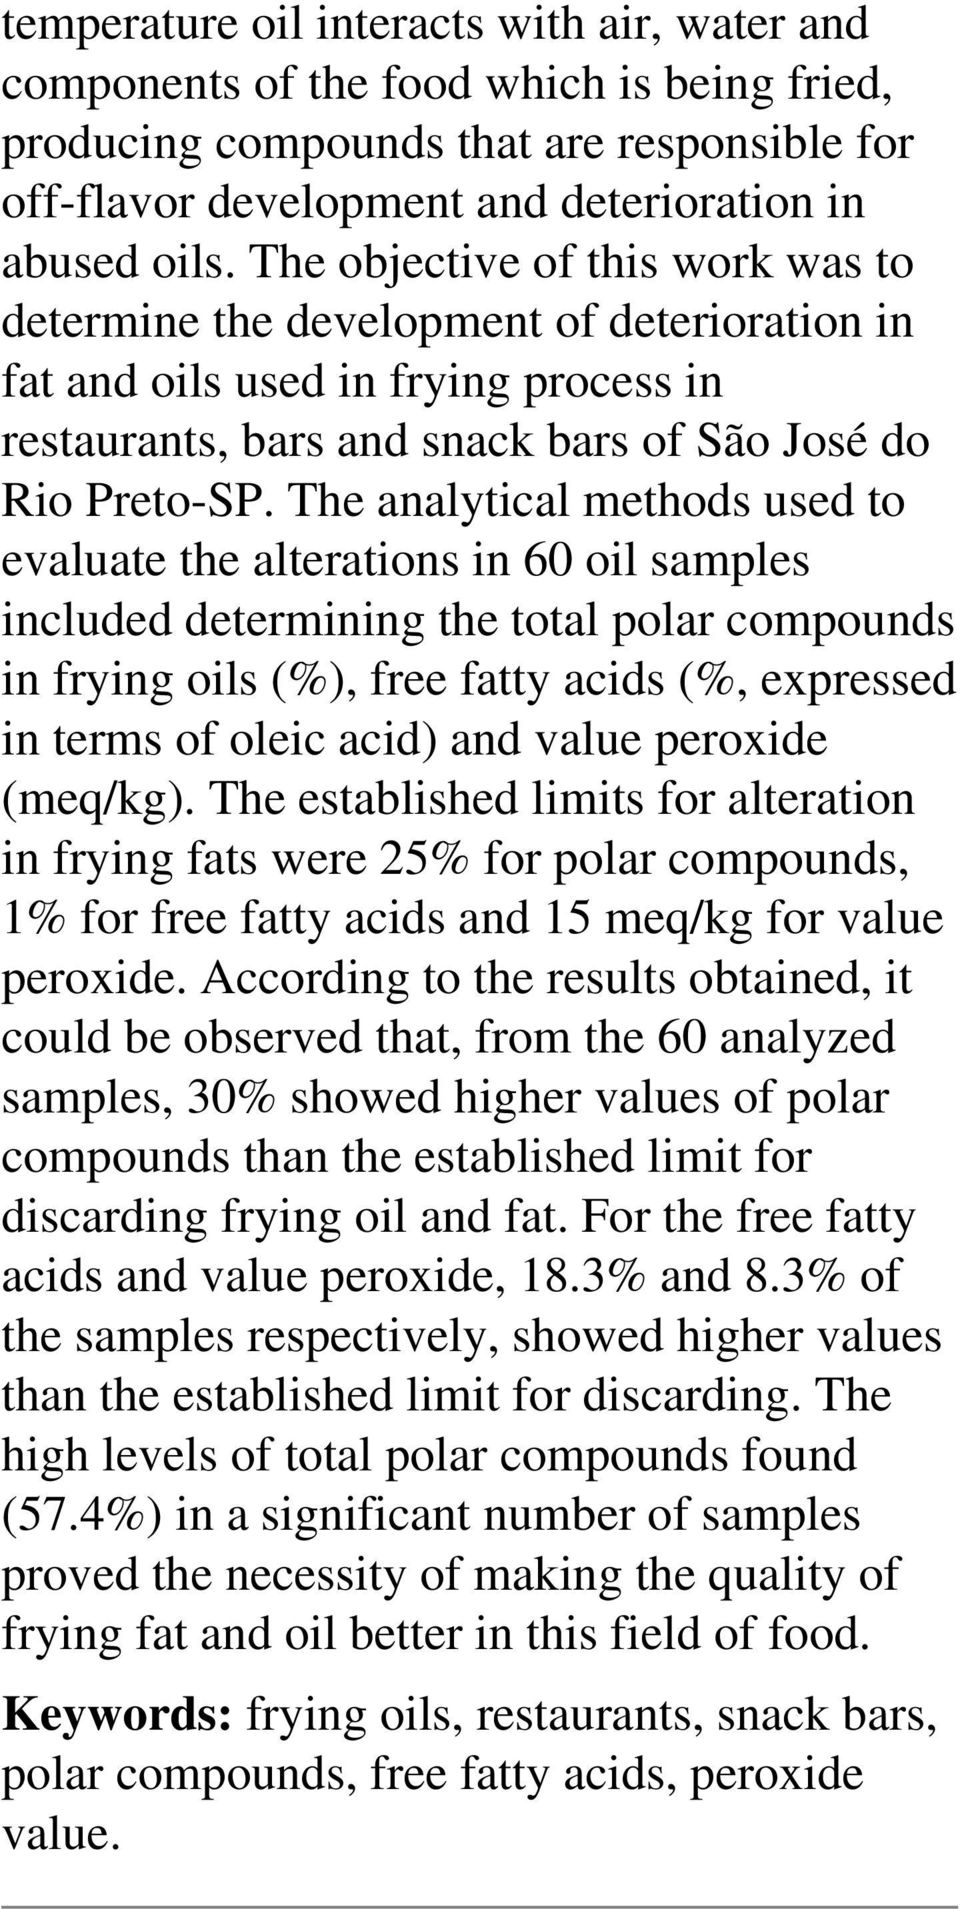 The analytical methods used to evaluate the alterations in 60 oil samples included determining the total polar compounds in frying oils (%), free fatty acids (%, expressed in terms of oleic acid) and